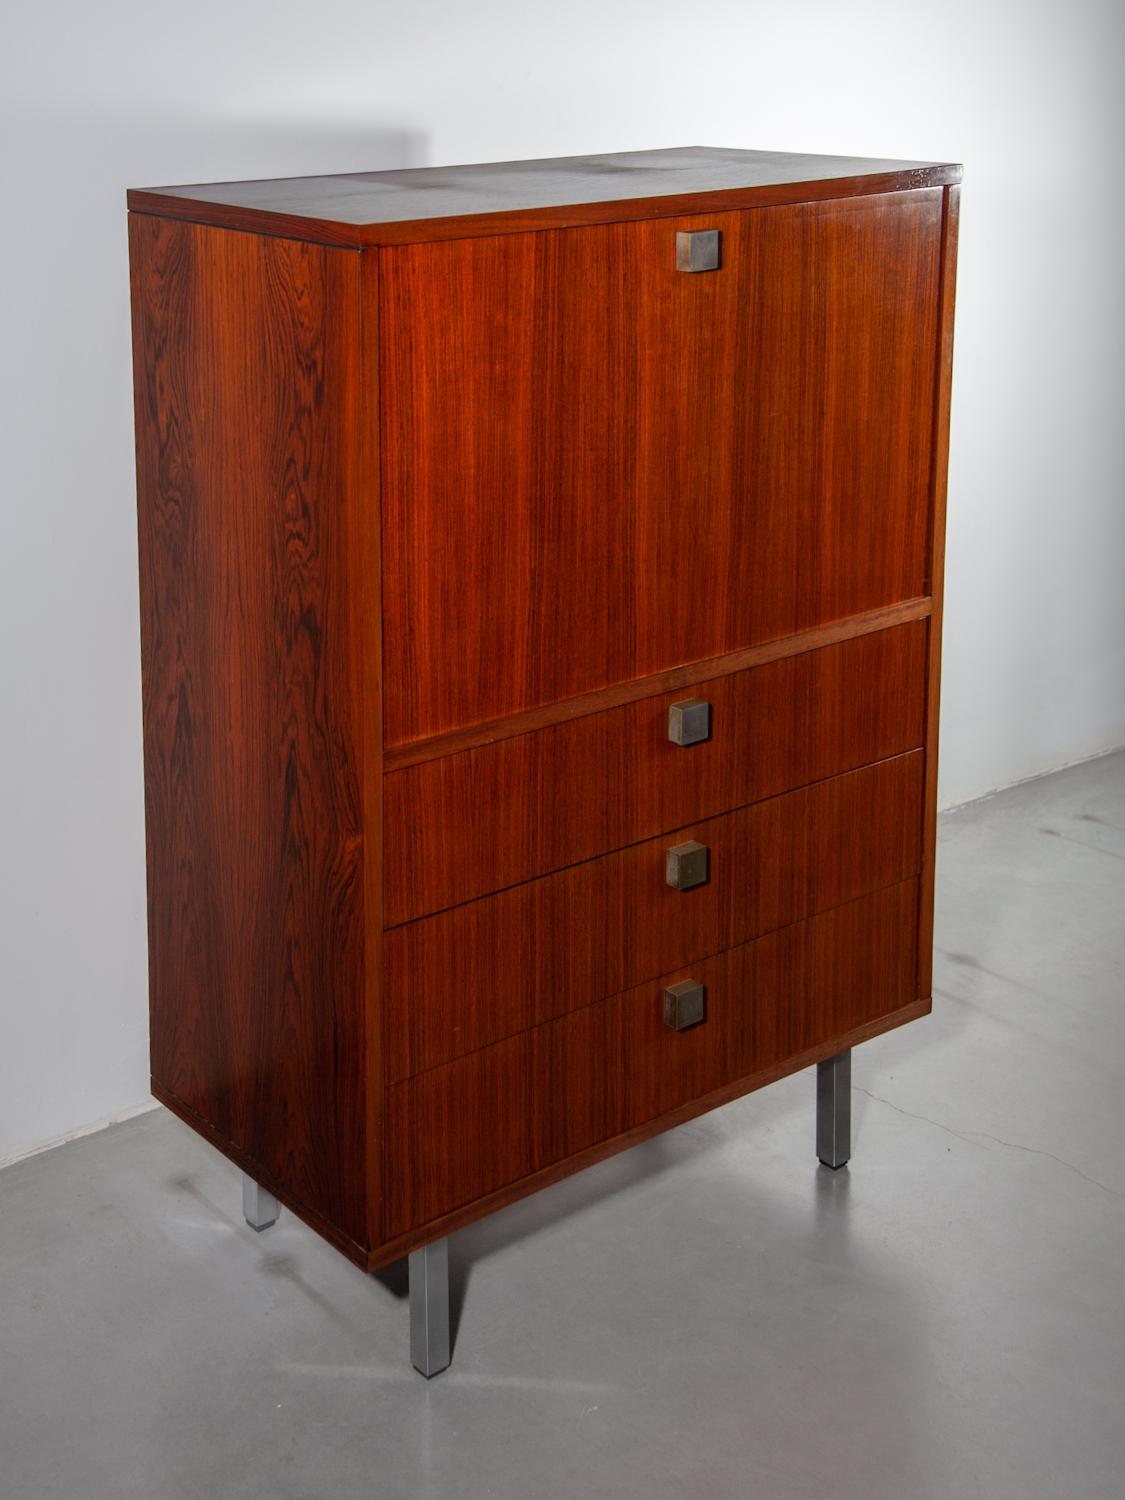 A Bar cabinet, 1960 from the Architect Alfred Hendrickx. A cubic cabinet raised on  silver metal legs, cleverly stores a concealed secretary desk. An upper door folds down to reveal a writing desk, lower three drawers open. The wood veneer is bright